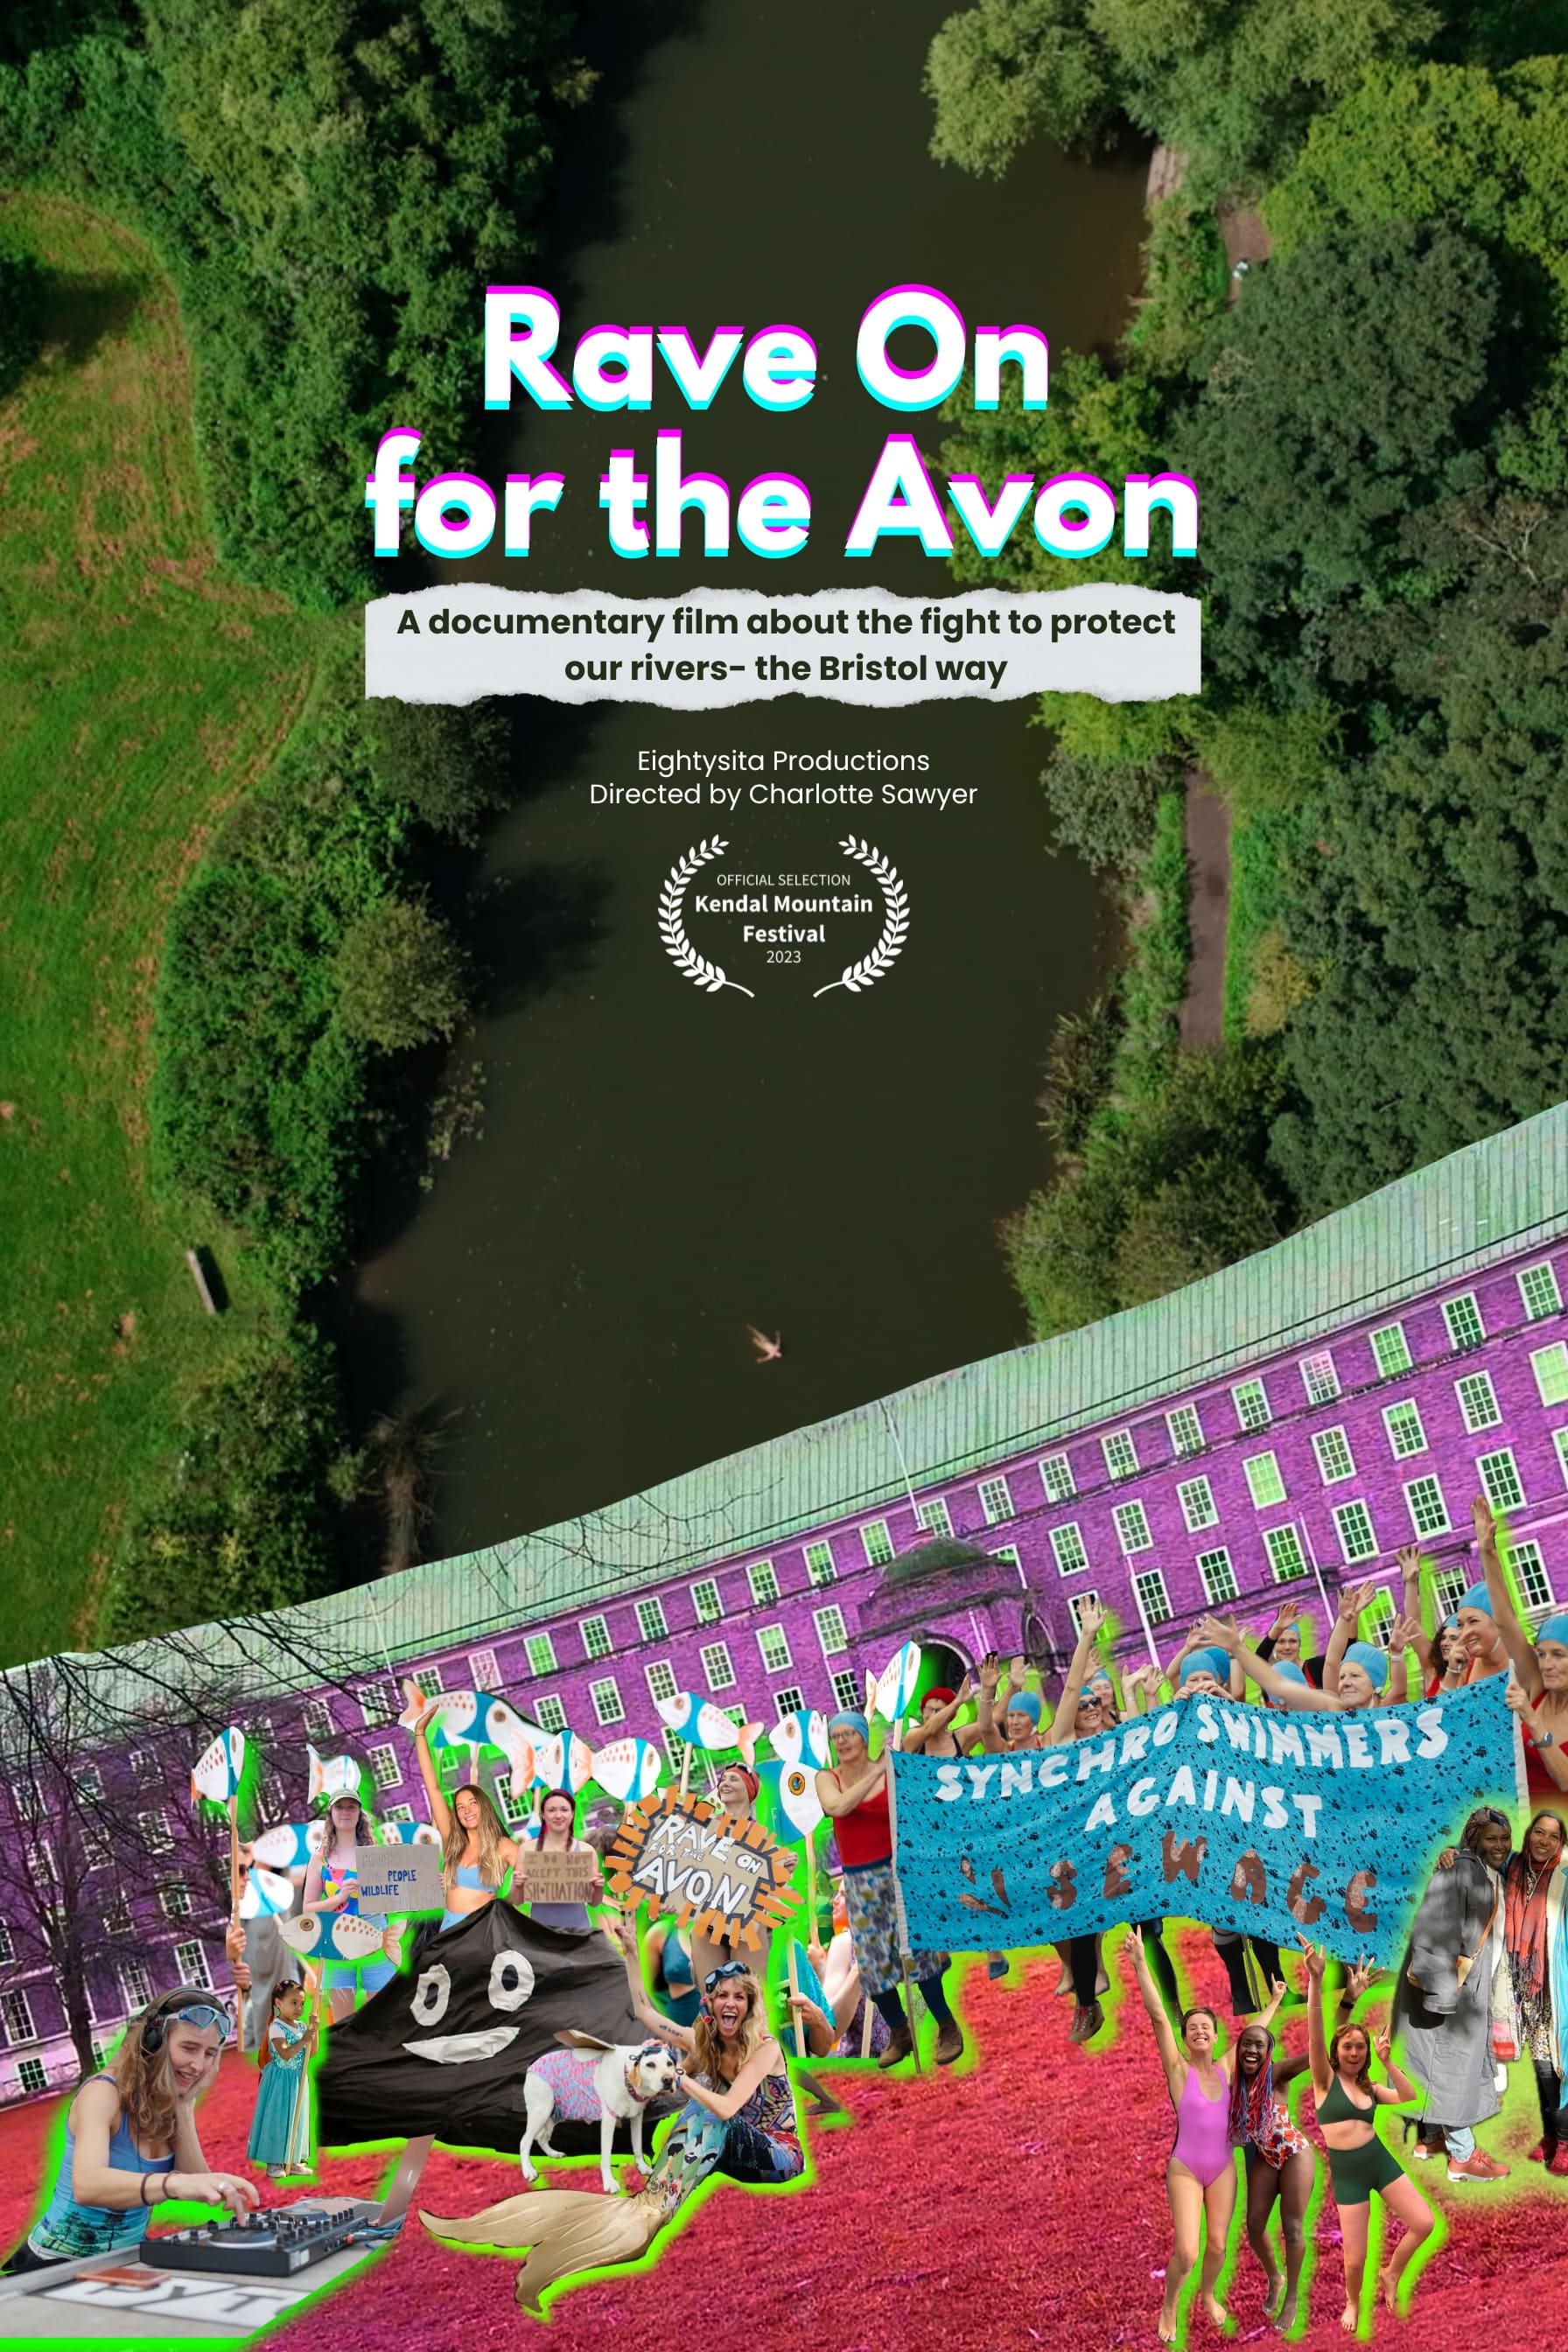 Rave on for the Avon